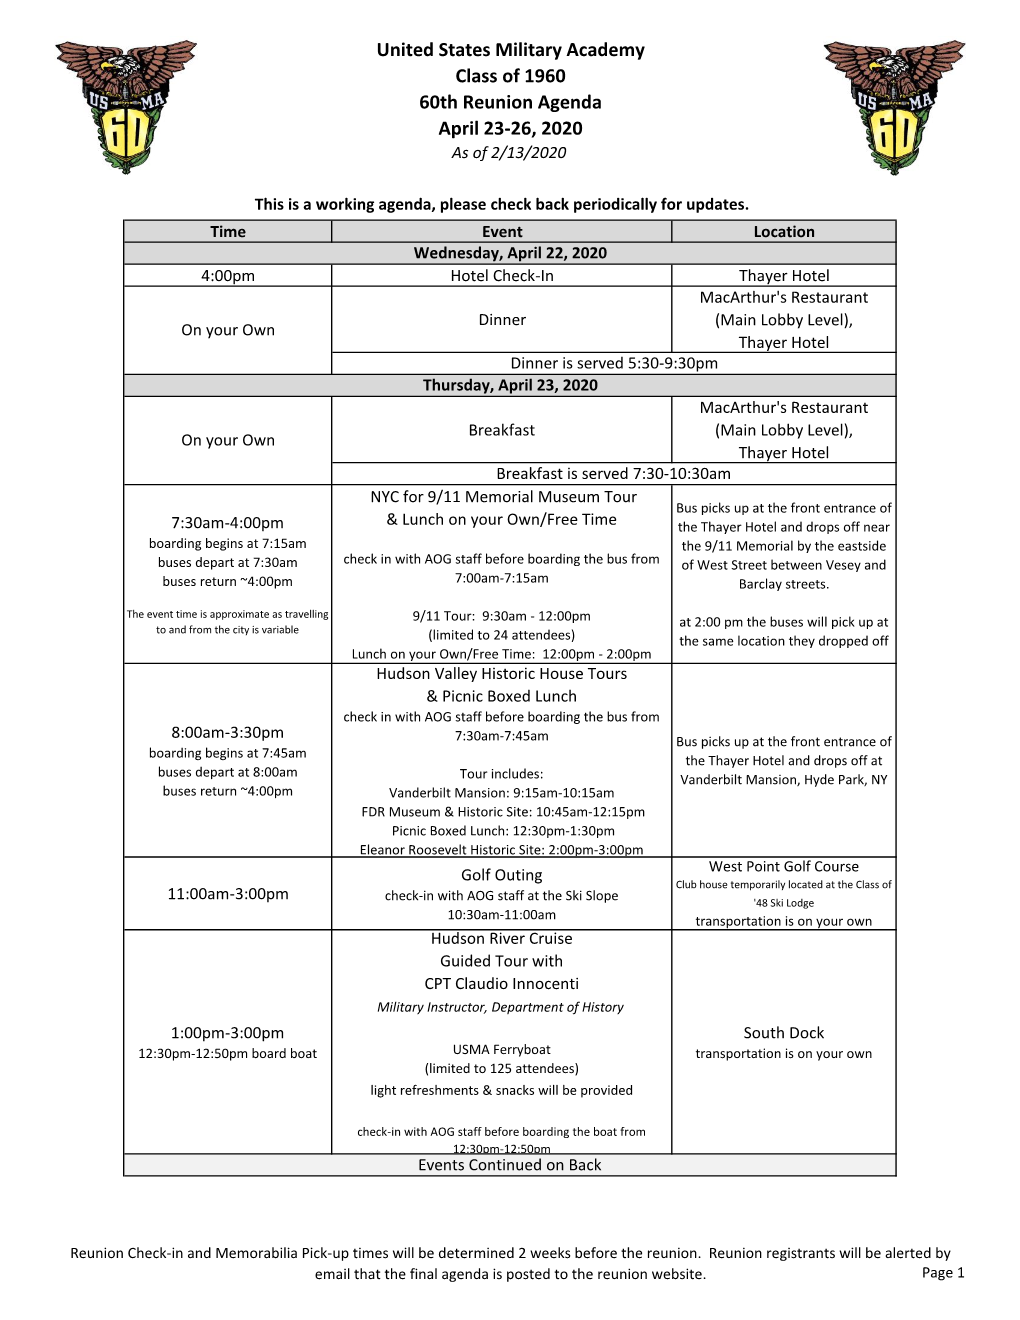 United States Military Academy Class of 1960 60Th Reunion Agenda April 23-26, 2020 As of 2/13/2020